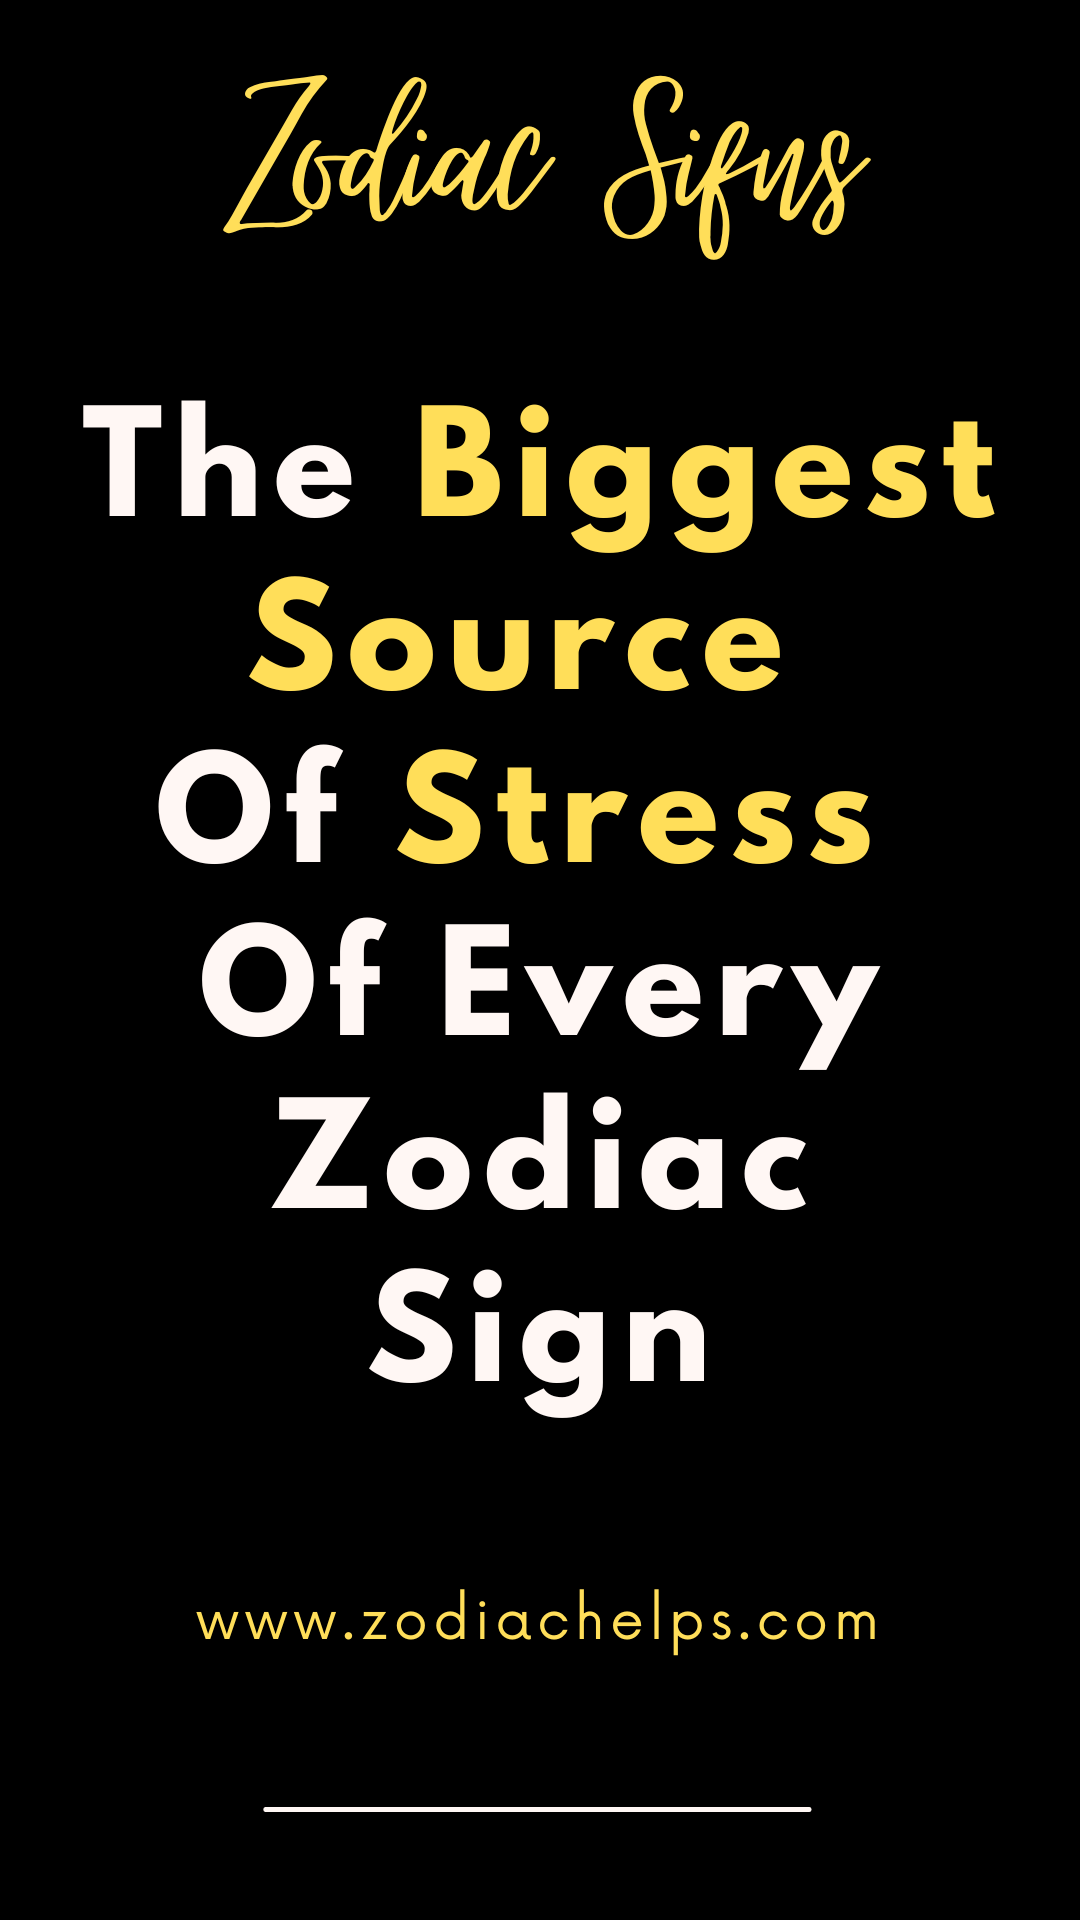 The Biggest Source Of Stress Of Every Zodiac Sign